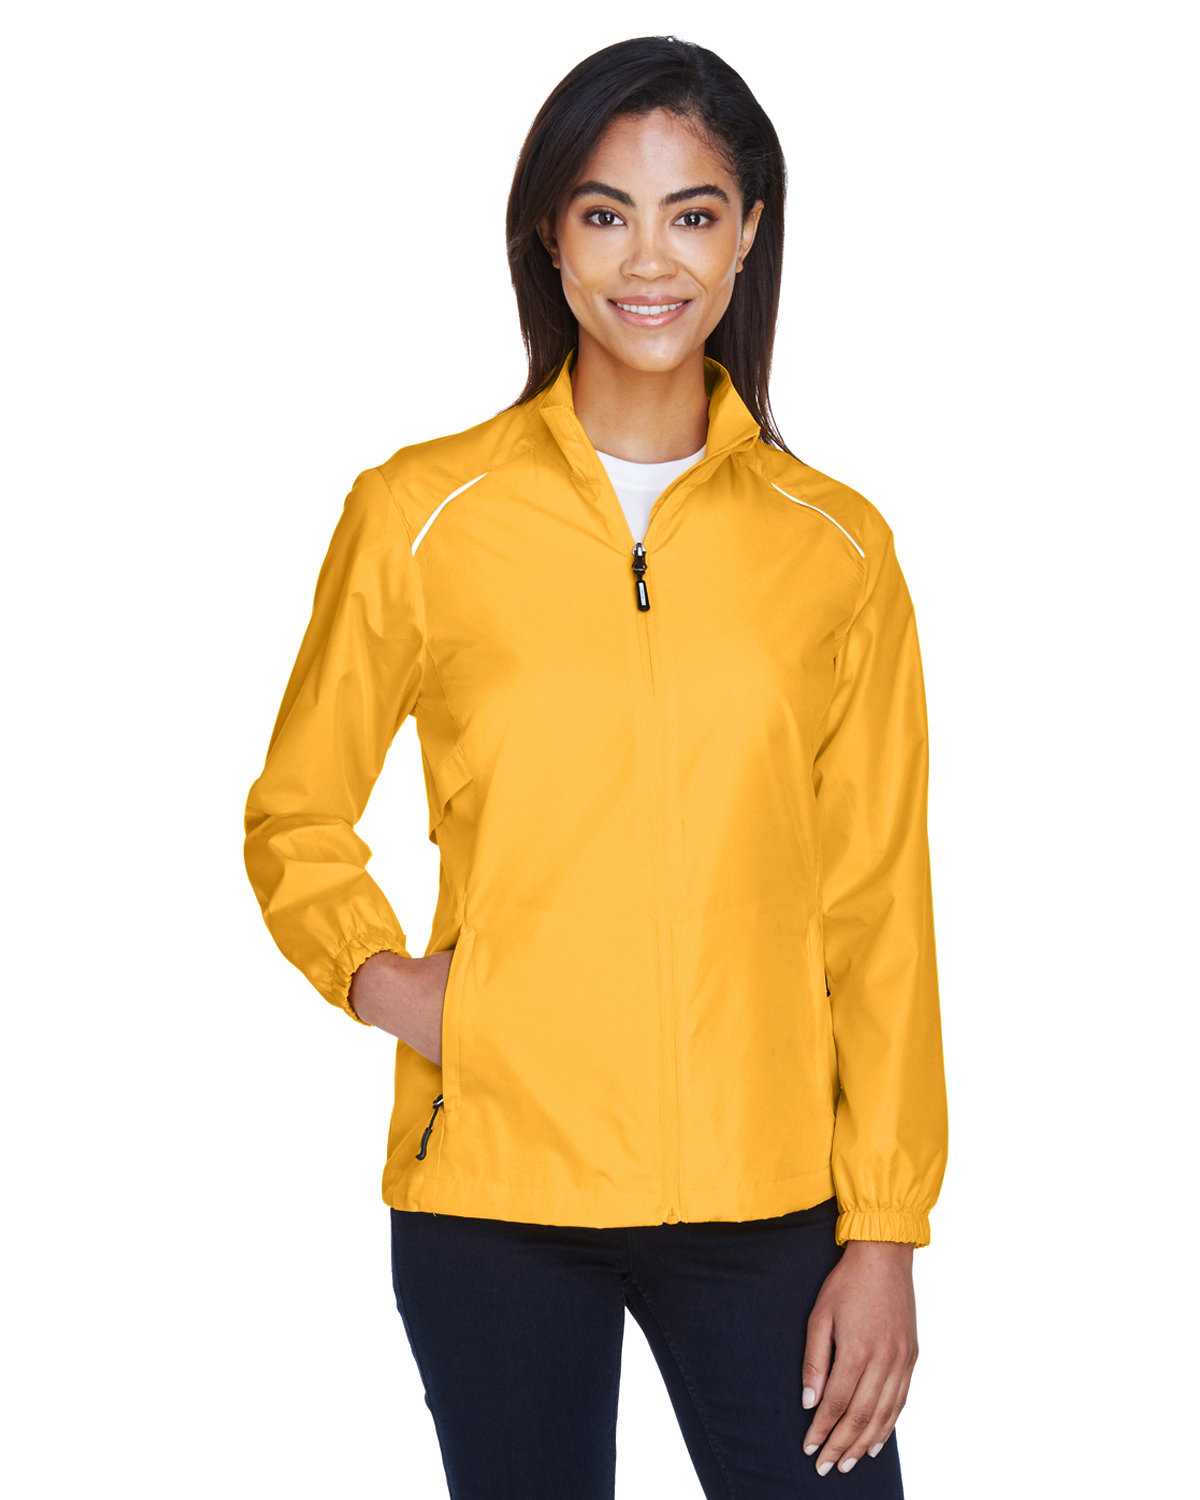 Core 365 Ladies' Motivate Unlined Lightweight Jacket CAMPUS GOLD 